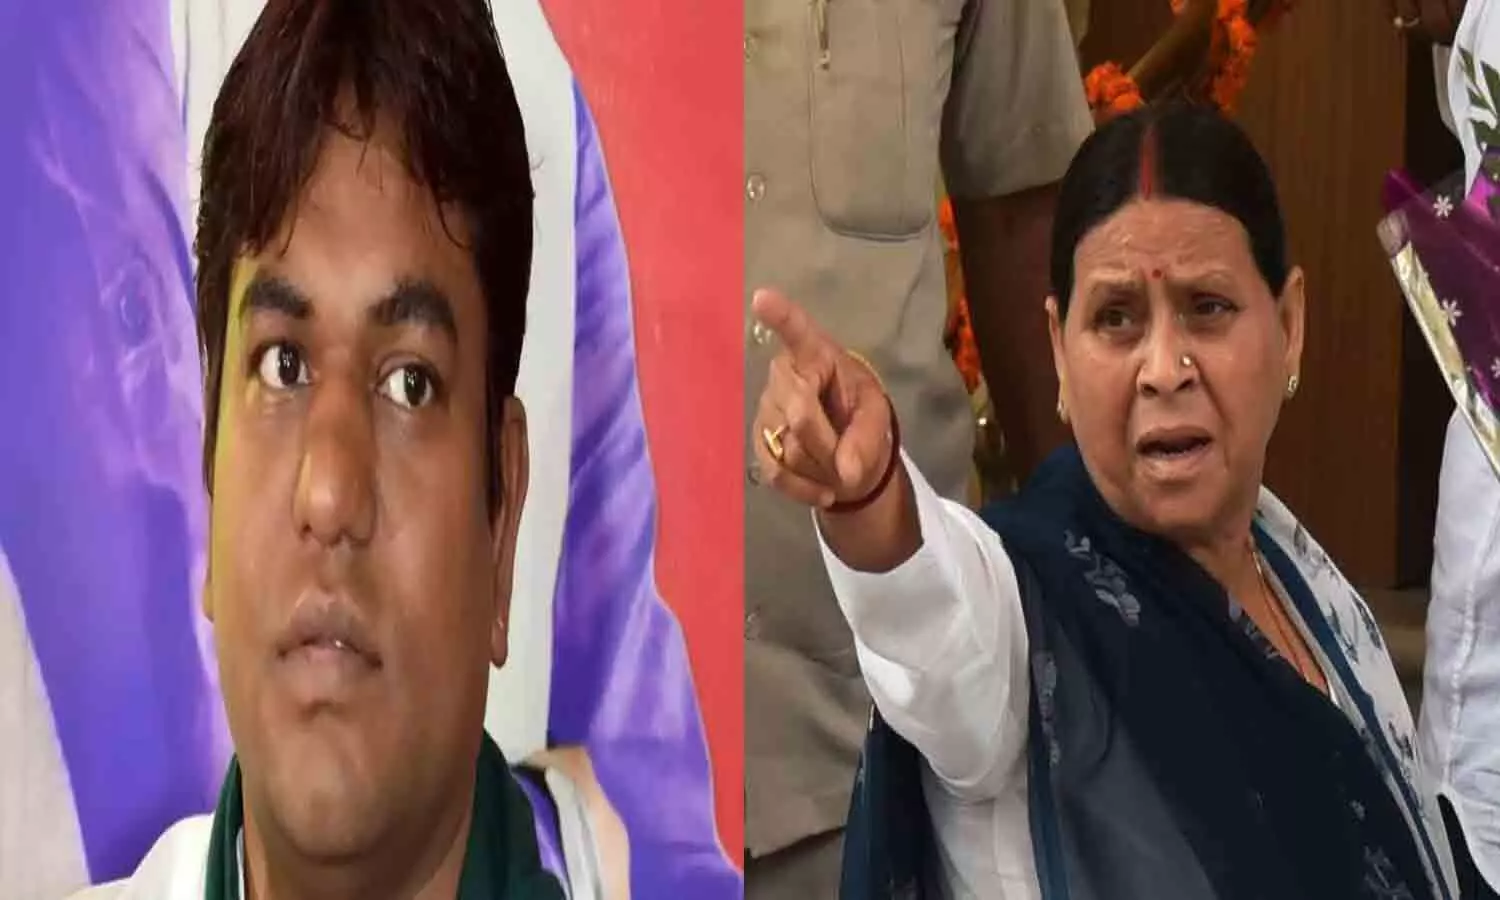 Rabri Devi said on joining VIPs grand alliance, said - there is no need for Mukesh Sahni, many leaders of Sahni society in RJD